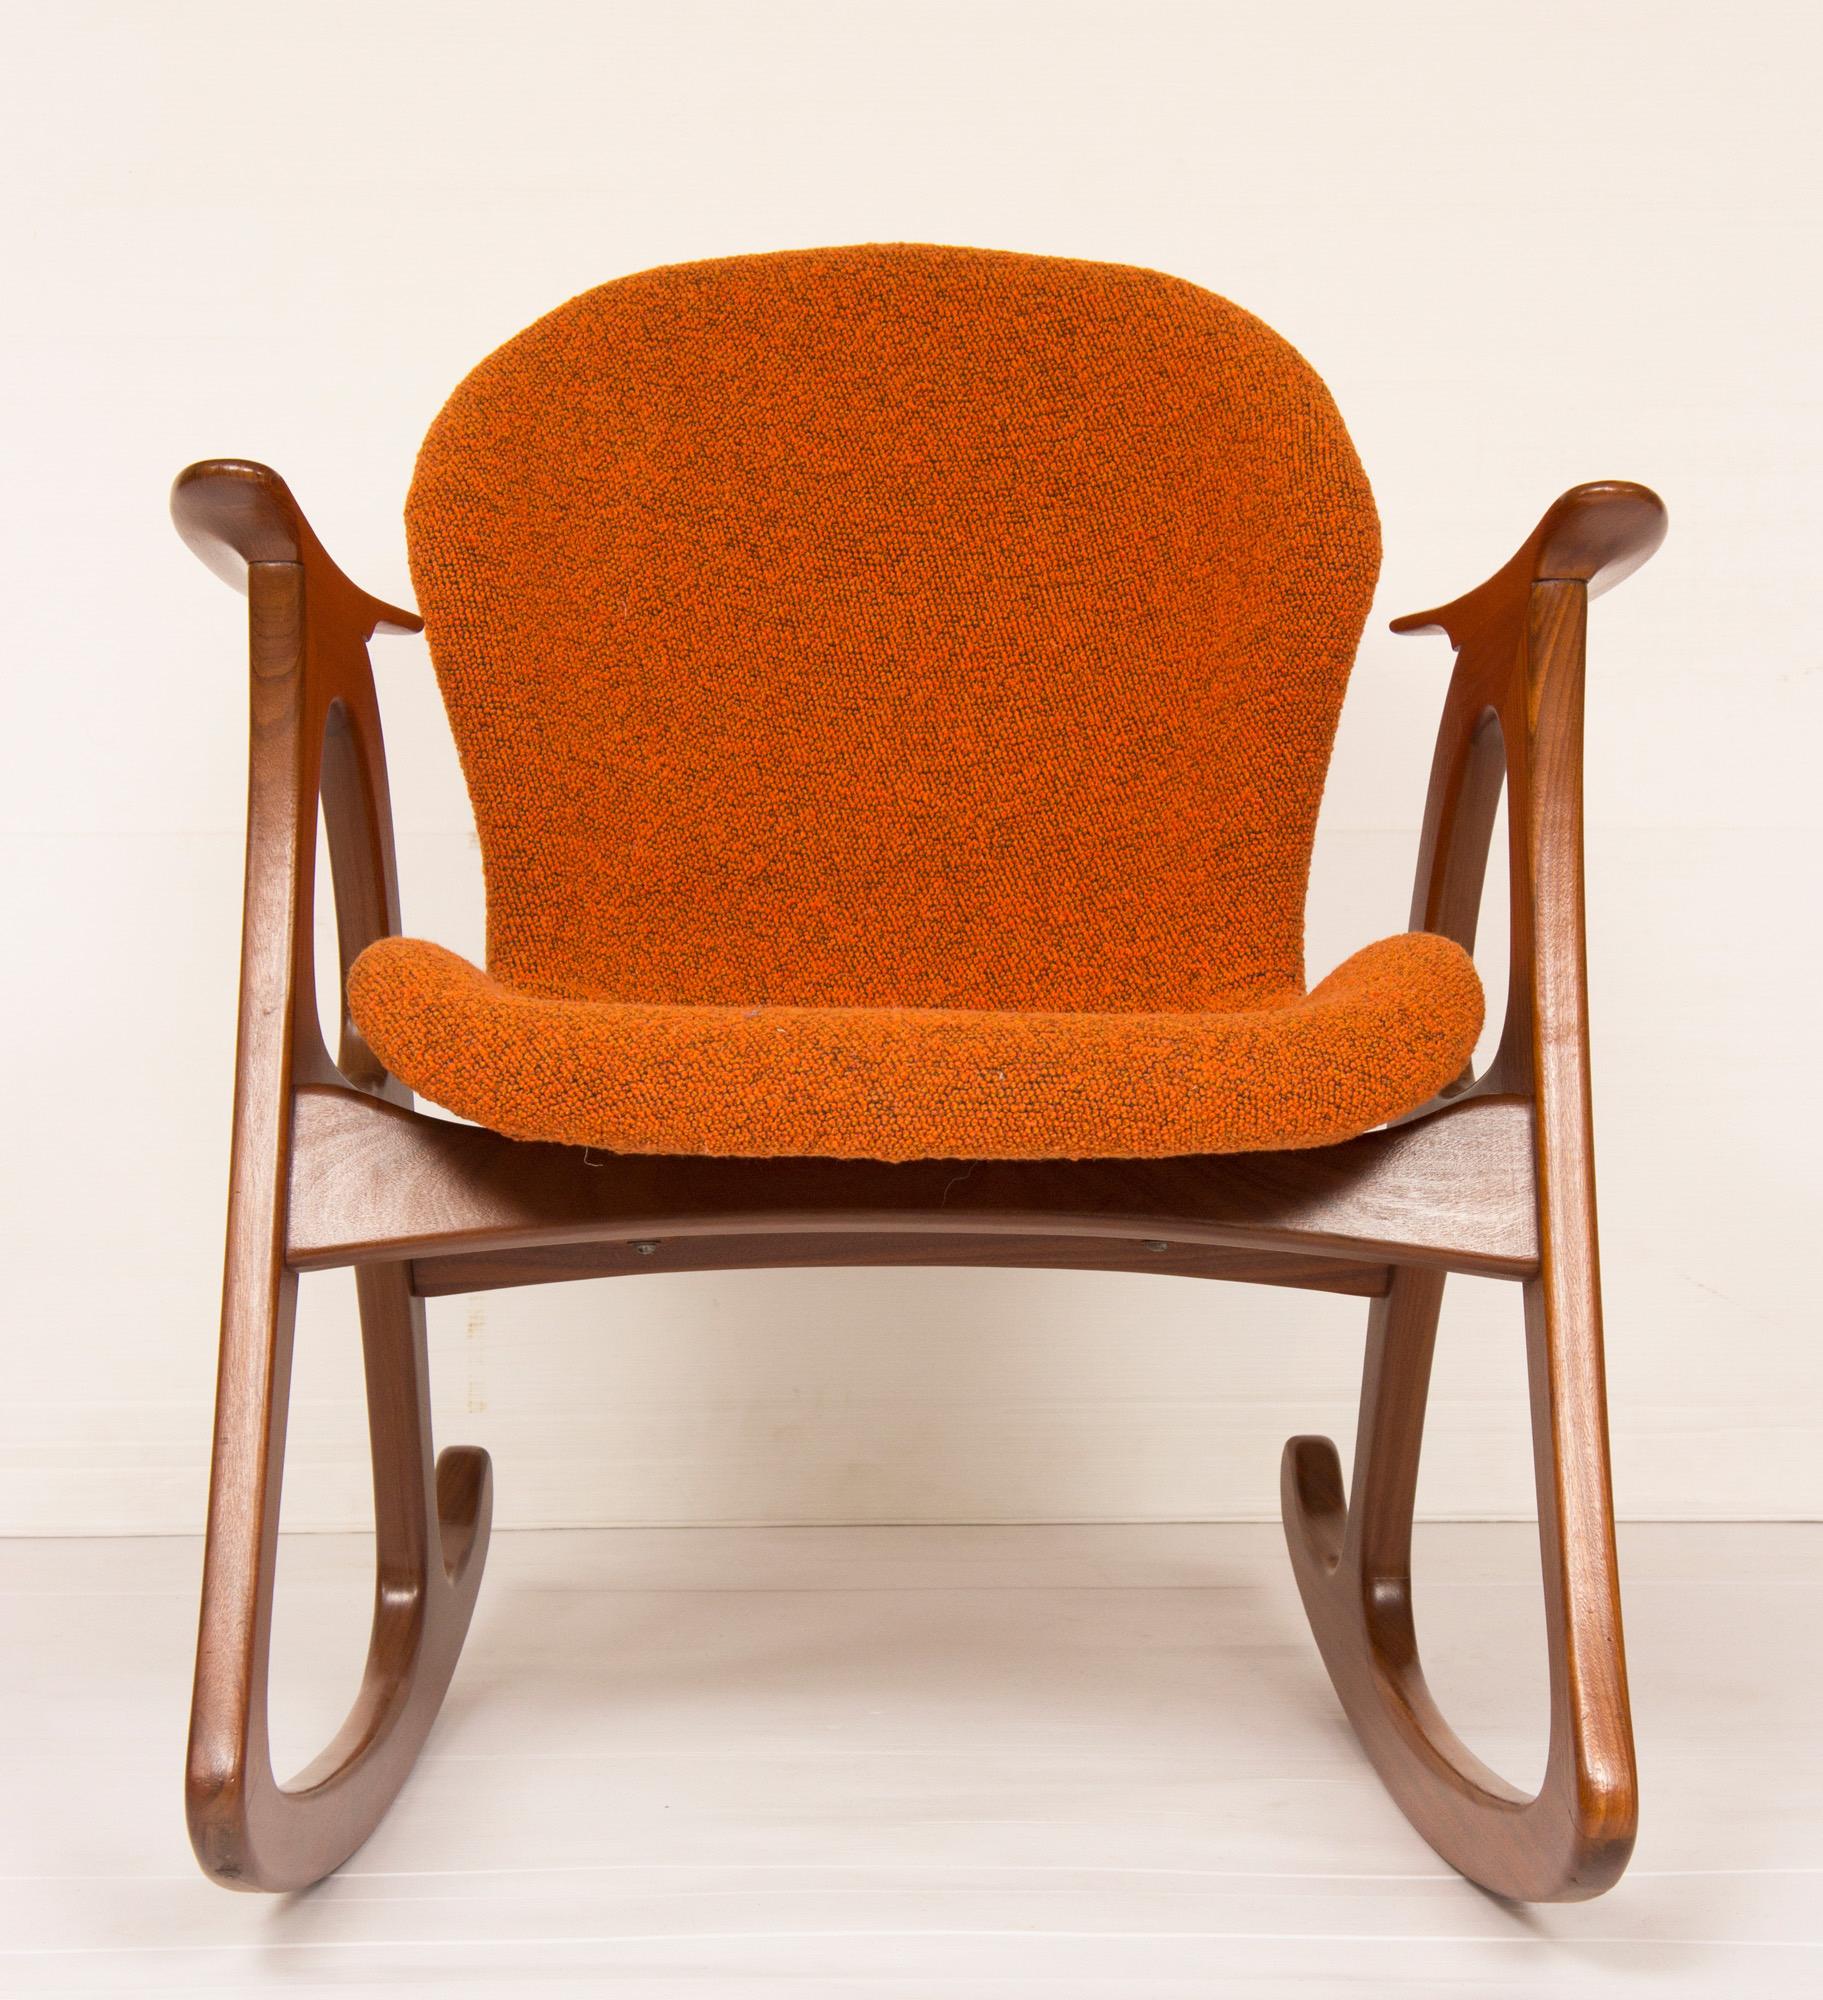 Mid-Century Modern design rocking chair.
Midcentury rocking chair in Afromosa wood, newly upholstered in an orange tweed fabric.
Designed by Aage Christiansen for Erhardsen Andersen.
Measures: H: 71 cm W: 61 cm D: 77 cm
Danish, circa 1961.